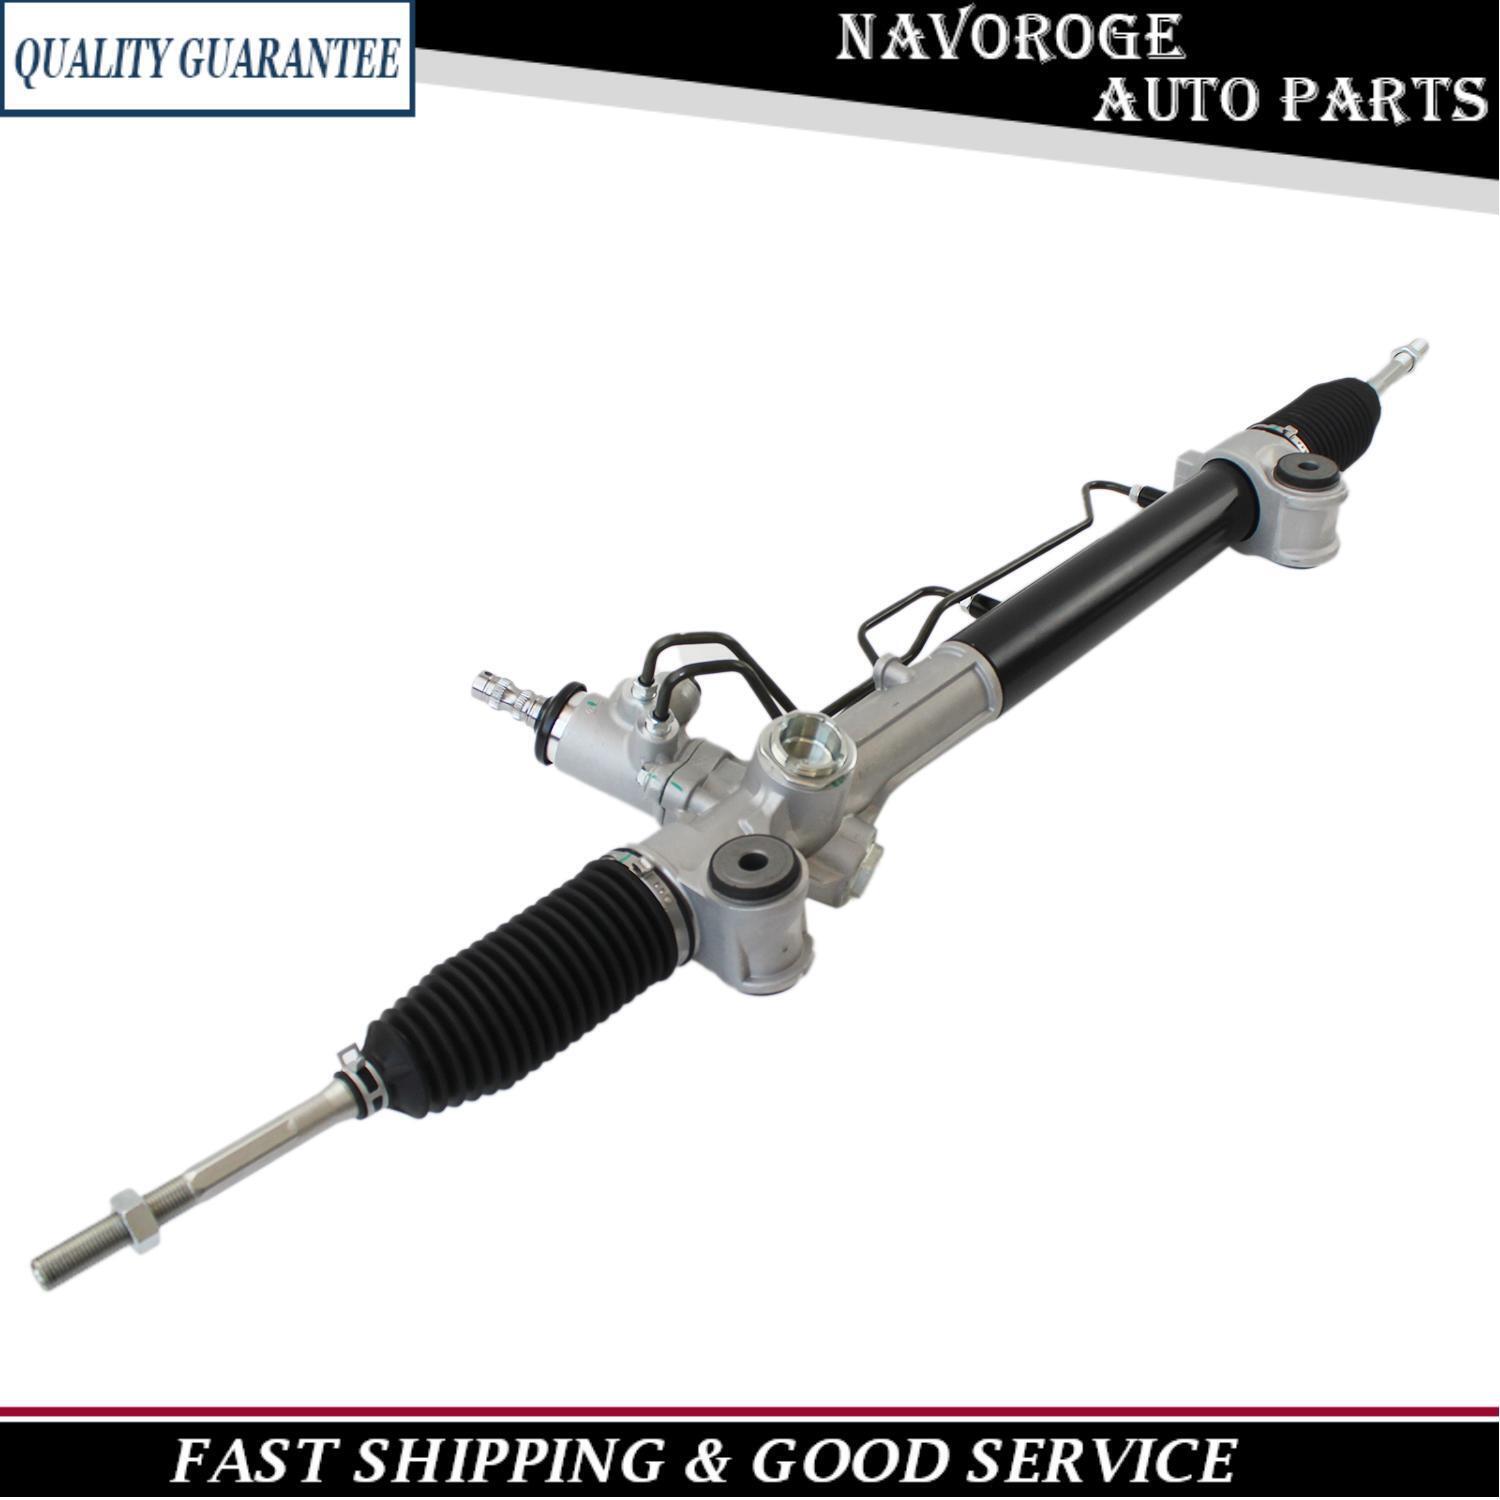 NEW 1pc Power Steering Rack and Pinion Fits For 2007-11 Toyota Camry Lexus ES350